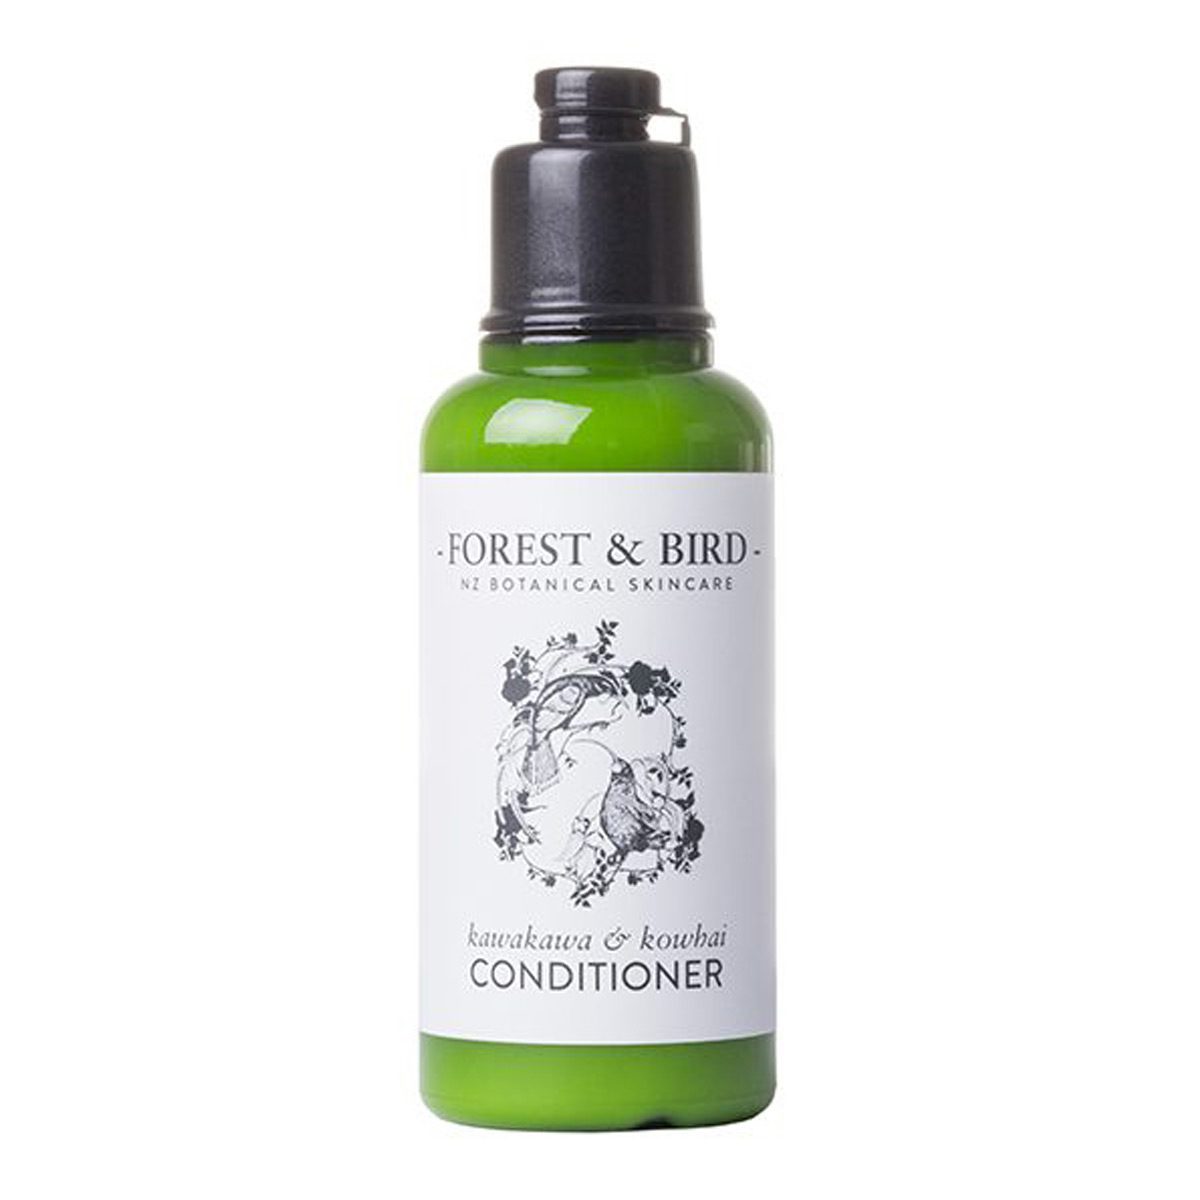 consumables-hospitality-guest-amenities-forest-and-bird-conditioner-bottle-x128-enriched-native-forest-extracts-kawakawa-kowhai-vjs-distributors-HUIACB